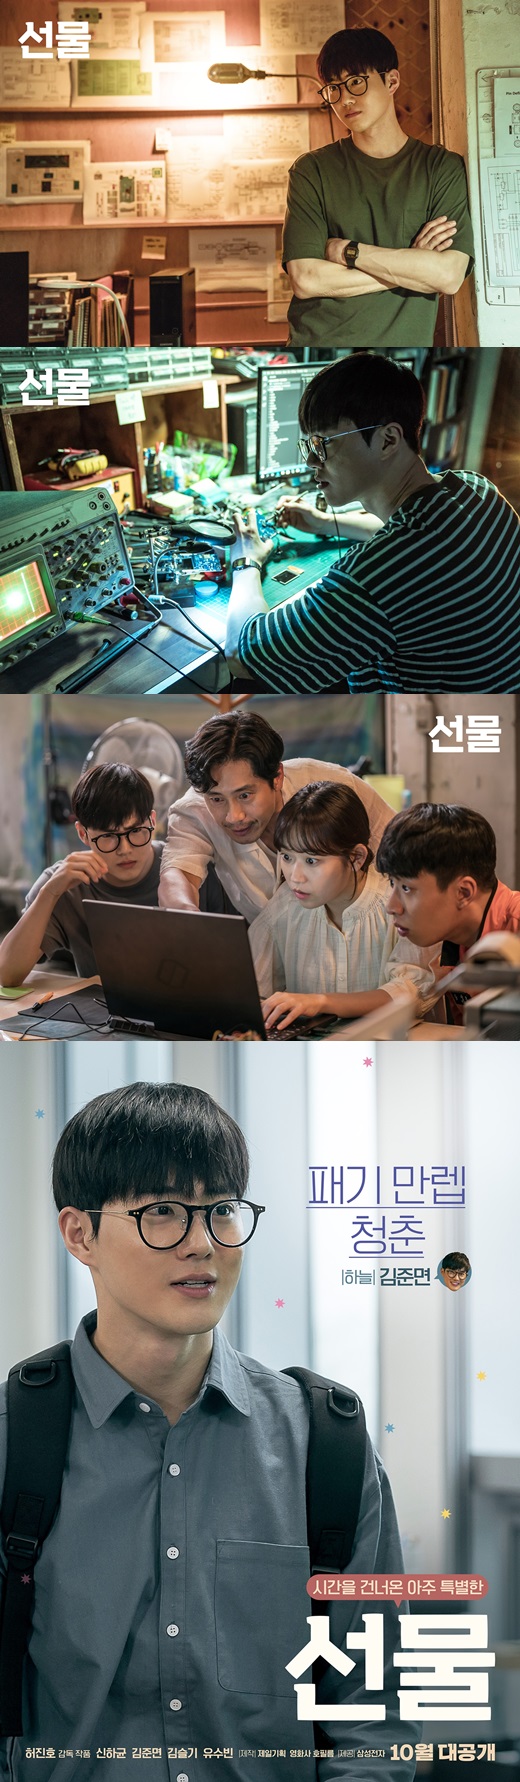 Suho appeared in the short film Gift directed by Huh Jin-ho, which was released on the 28th, as a young sky station struggling to develop a fire-fighting thermal camera.In particular, Suho expressed his enthusiasm and sincerity of young people in their 20s who are challenging the start-up with one idea that splashes through this work, and expressed various emotions naturally to the bitter taste of society due to continuous failure and made a deep impression on the audience.In addition, he is making a serious and serious comic chemistry with Shin Ha-kyun, who came to 2019 as a time slip in the play, and attracts attention by offering a pleasant charm with his breath that is different from his team members Kim Seul-gi and Youngbok (Yoo Soo-bin).Gift is a delightful and youthful comedy about the story of a suspicious man from the past appearing in front of the young people who gathered to realize a sparkling idea.You can find them on YouTube, portal sites, IPTV (OleTV, BTV, U + TV), and digital cable broadcasts (CJ HelloVision, Hyundai HCN, Tibor Road, and Delive).